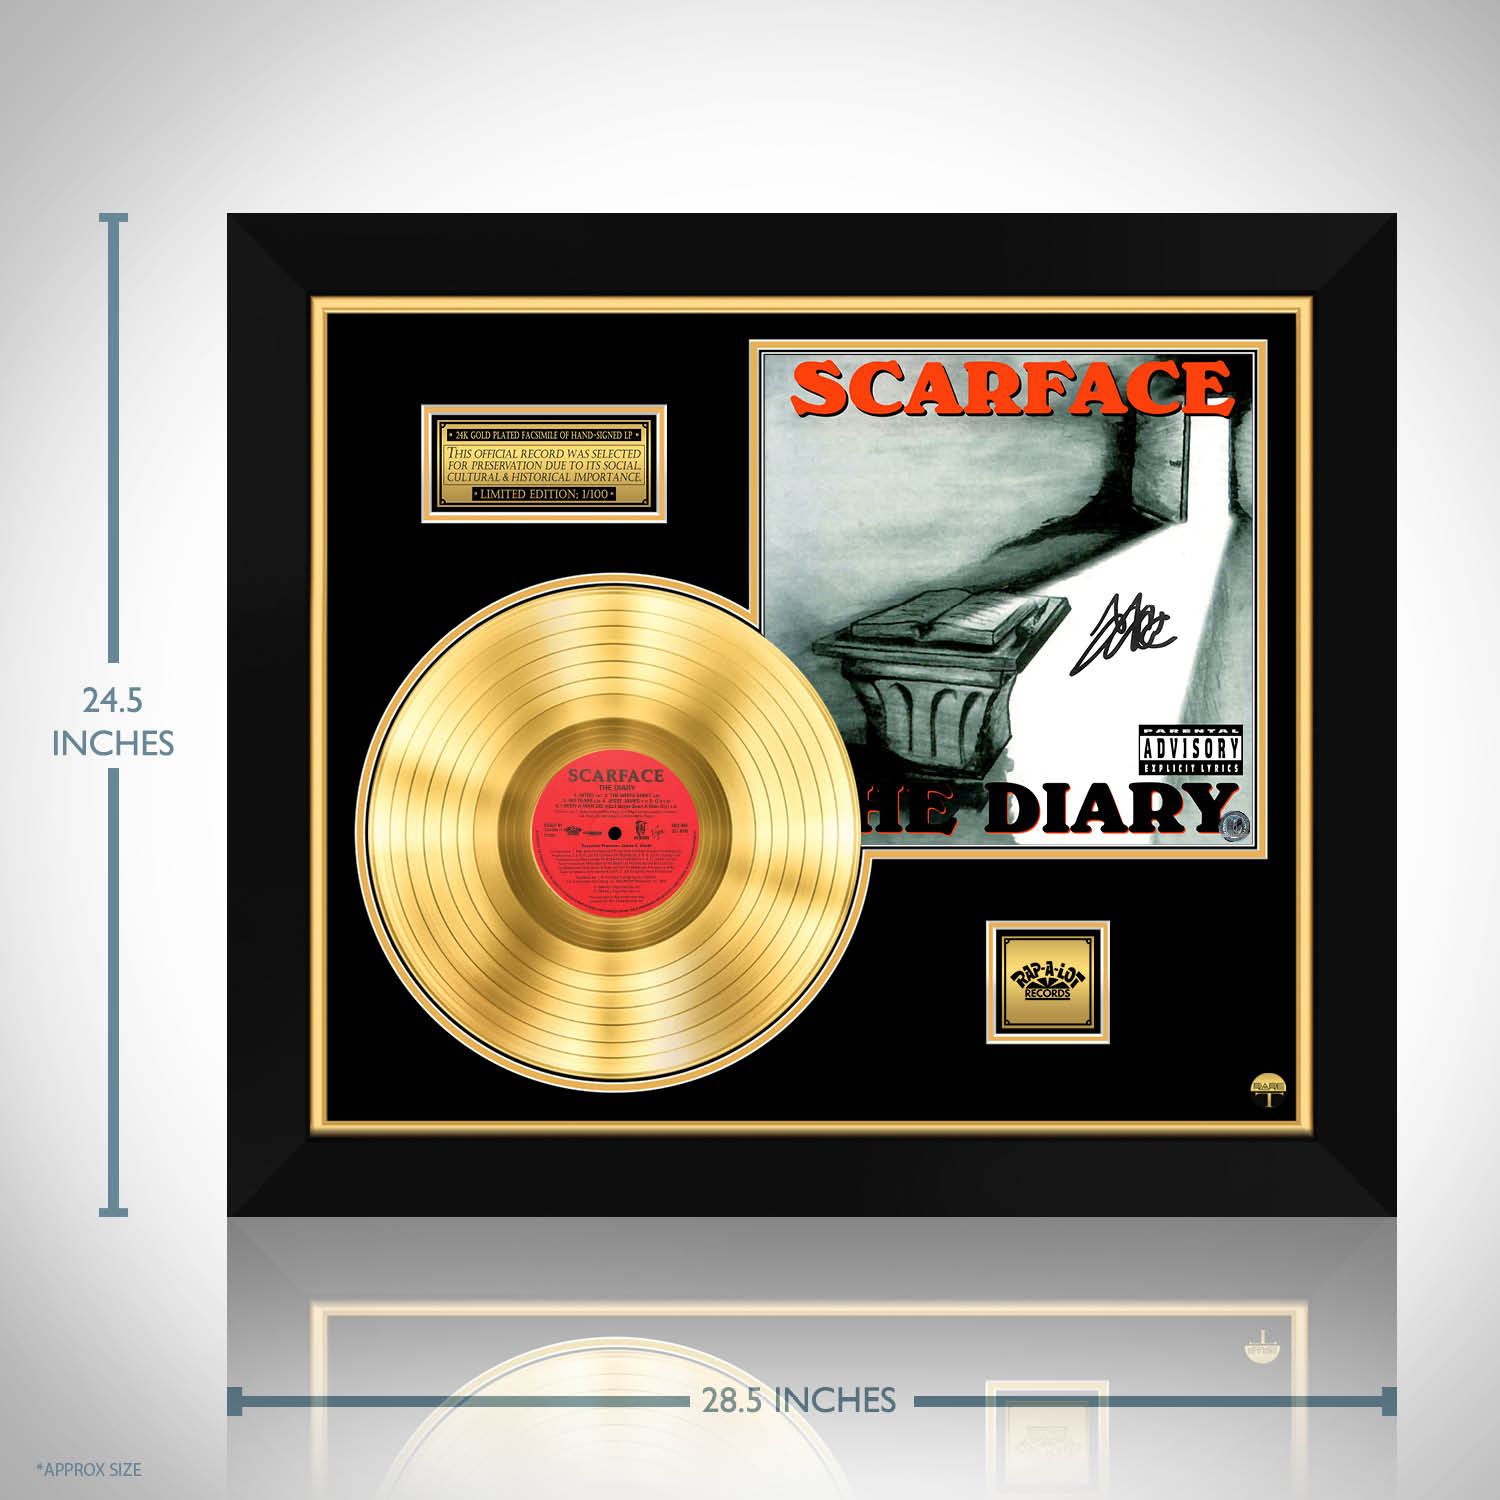 Scarface - The Diary Gold LP Limited Signature Edition Custom 